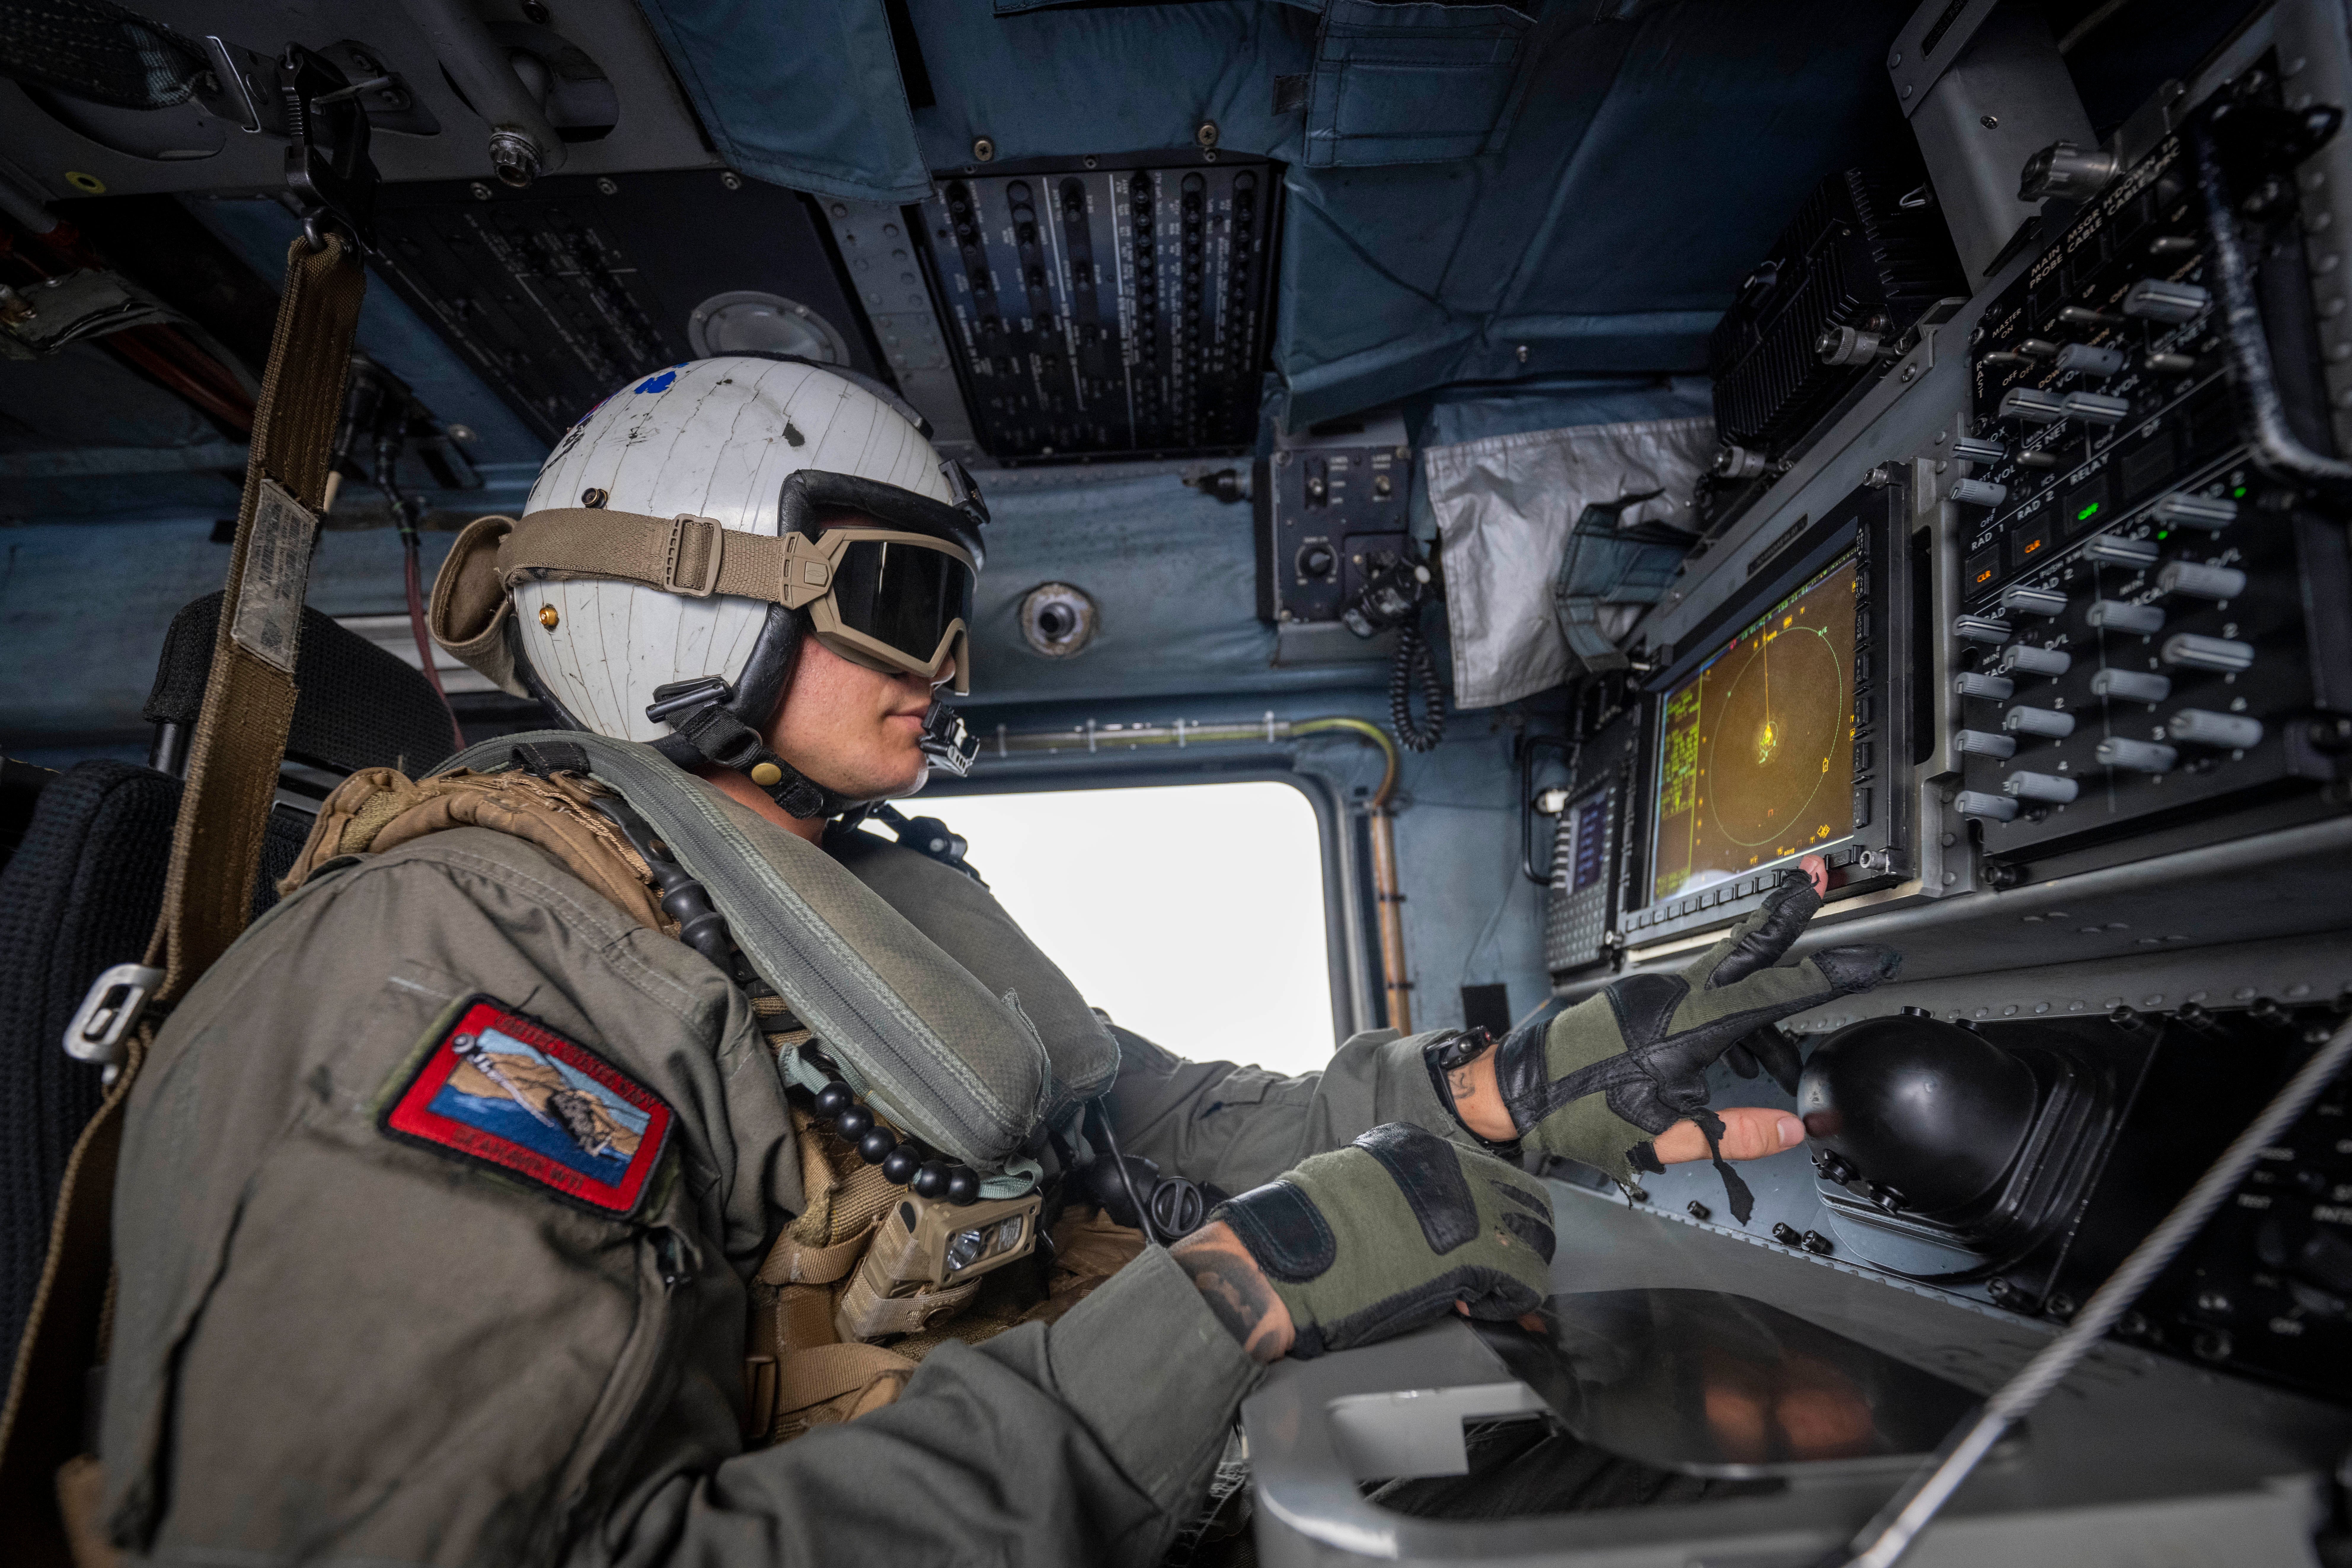 PACIFIC OCEAN (July 30, 2022) Naval Aircrewman (Helicopter) 1st Class Humberto Alba, attached to Helicopter Maritime Strike Squadron (HSM) 37, checks a radar during flight operations during Rim of the Pacific (RIMPAC) 2022. Twenty-six nations, 38 ships, three submarines, more than 170 aircraft and 25,000 personnel are participating in RIMPAC from June 29 to Aug. 4 in and around the Hawaiian Islands and Southern California. The world's largest international maritime exercise, RIMPAC provides a unique training opportunity while fostering and sustaining cooperative relationships among participants critical to ensuring the safety of sea lanes and security on the world's oceans. RIMPAC 2022 is the 28th exercise in the series that began in 1971. (U.S. Coast Guard photo by Petty Officer 3rd Class Taylor Bacon)